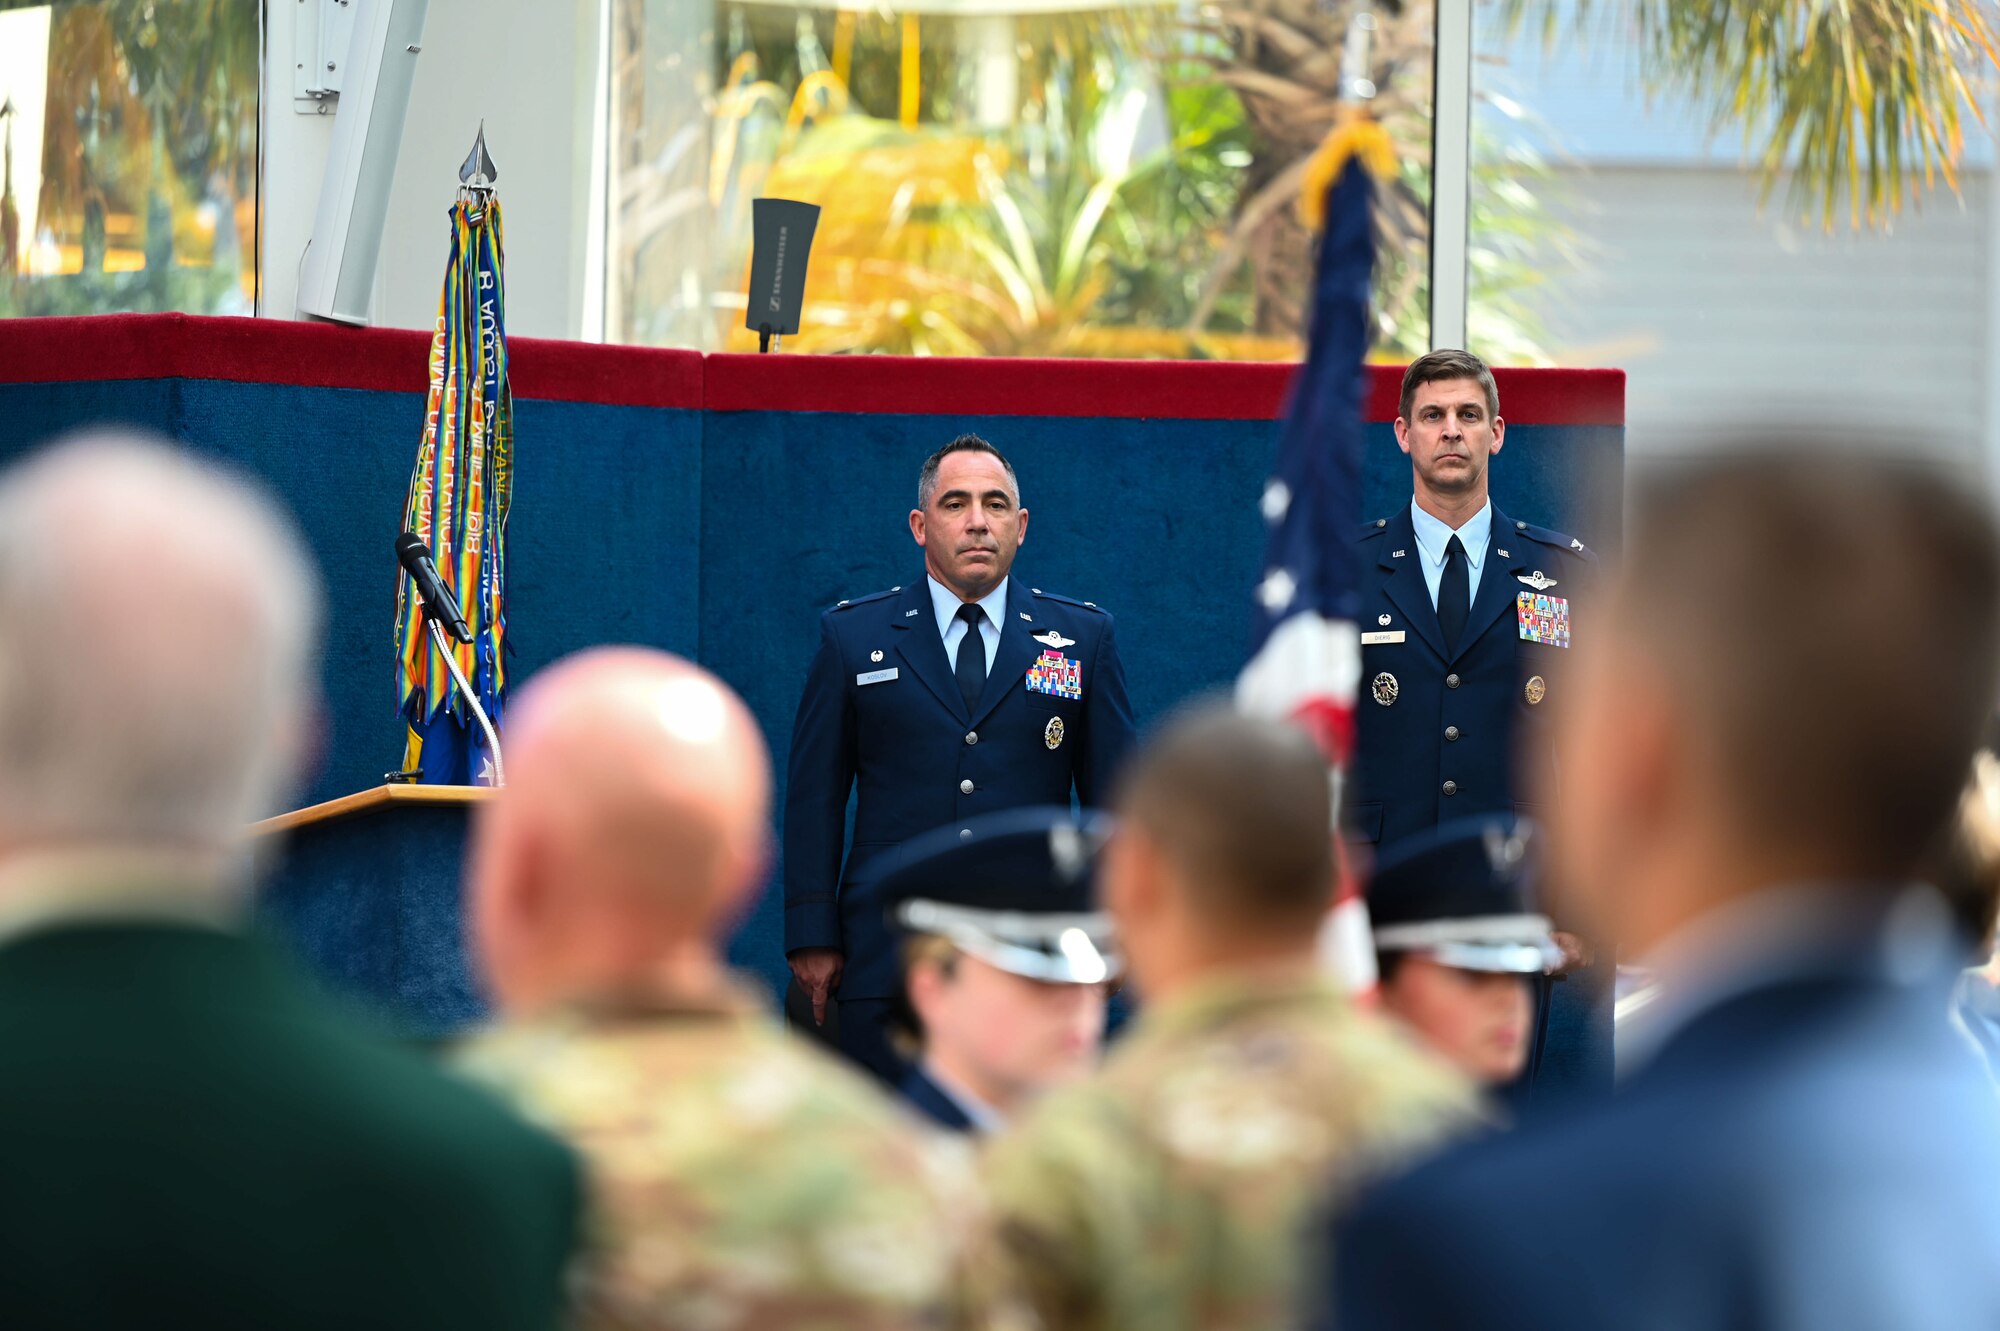 U.S. Air Force Col. Josh Koslov, 350th Spectrum Warfare Wing commander, left, and U.S. Air Force Col. Patrick Dierig, 479th Flying Training Group commander, right, stand at attention during the presentation of the Colors during the Undergraduate Combat Systems Officer Training graduation at the National Naval Aviation Museum, Naval Air Station Pensacola, Fla., Aug. 25, 2023. Koslov was invited as the keynote speaker during the graduation ceremony. (U.S. Air Force photo by Capt. Benjamin Aronson)